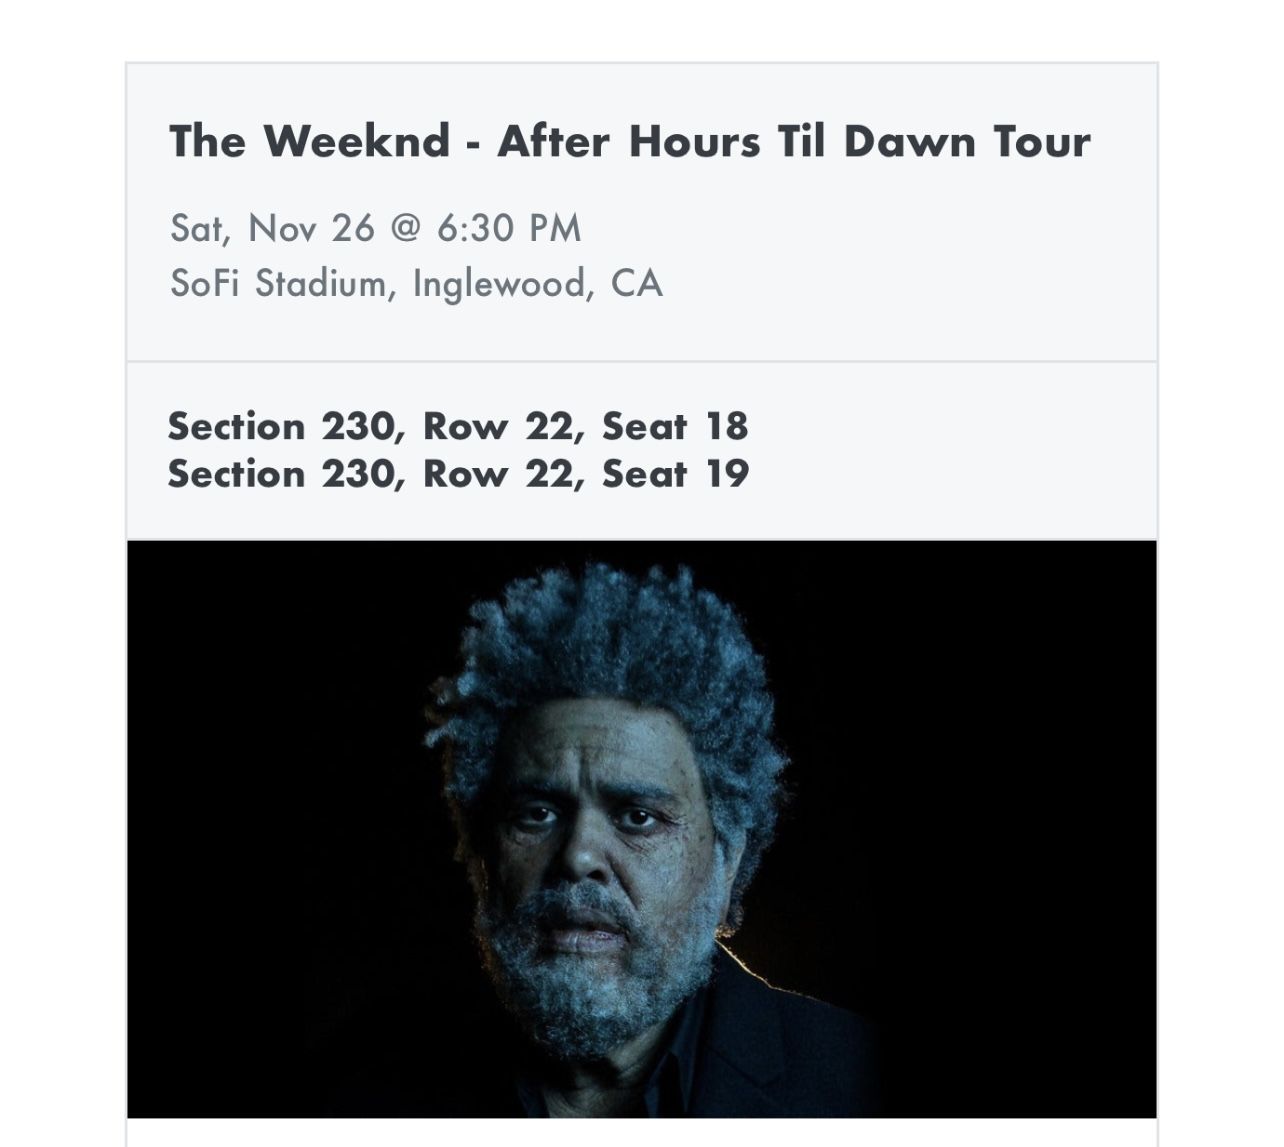 The Weeknd- After Hours Till Dawn Tour